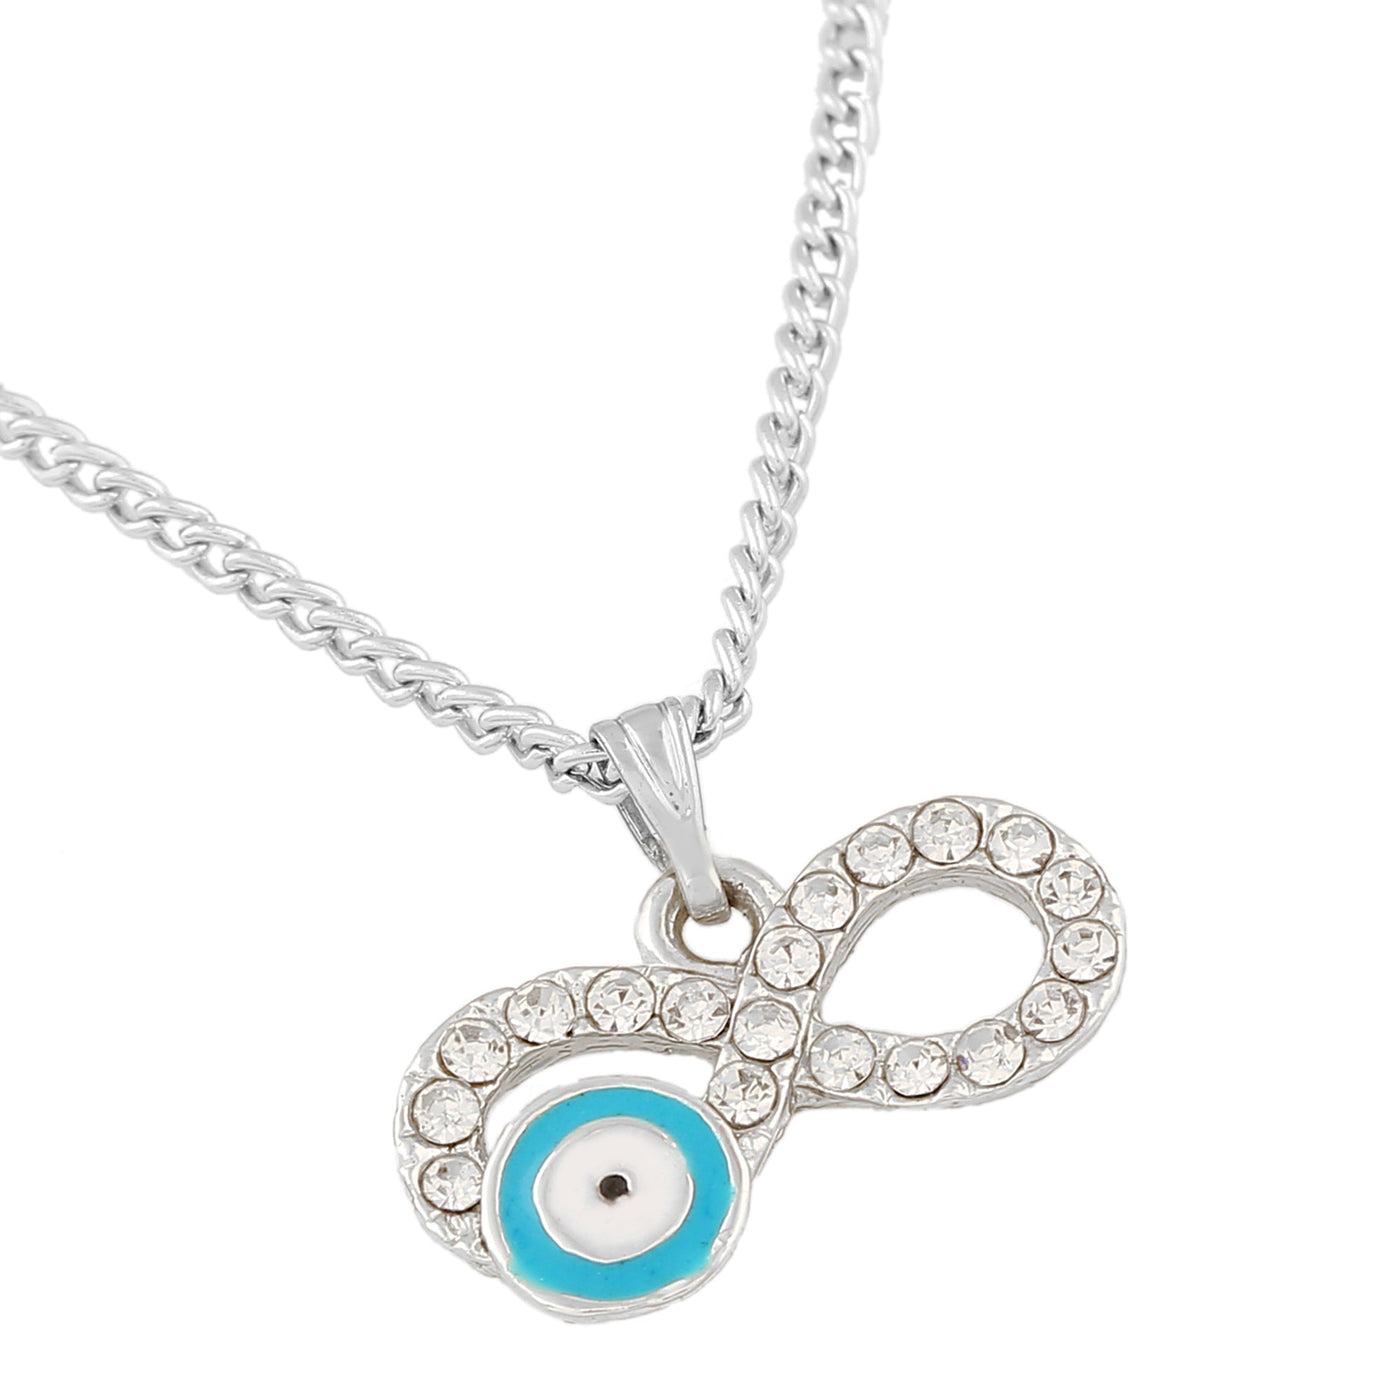 Estele Rhodium Plated Infinity Shaped Evil Eye Charm Pendant with Austrian Crystals for Girls/Women